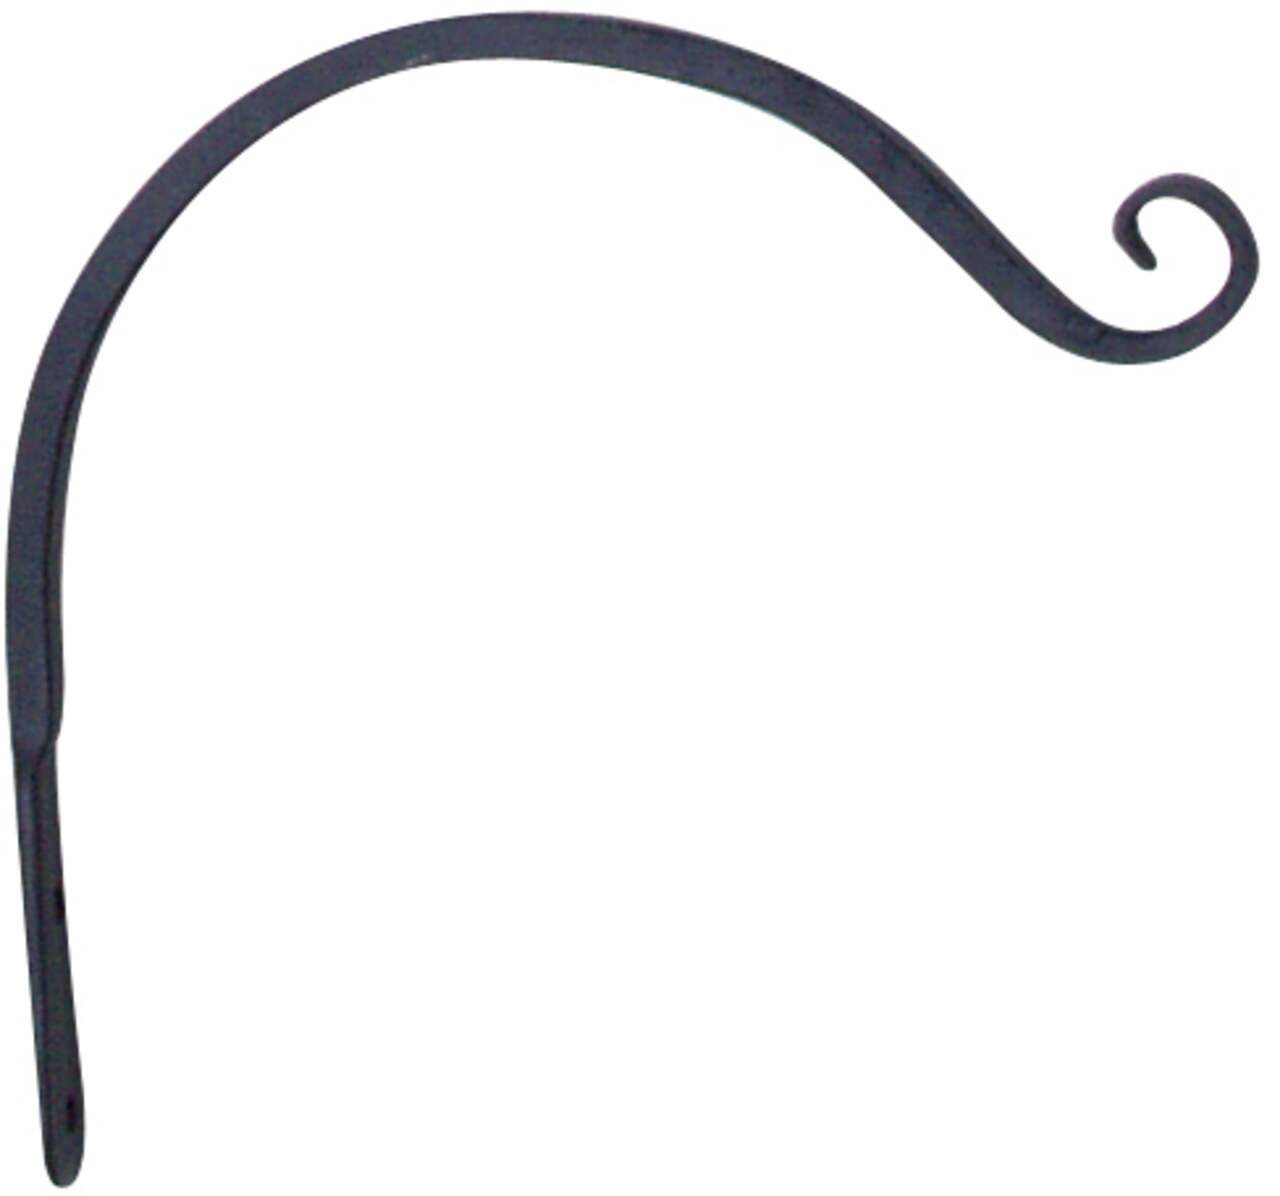 Forged Wall Plant Hook/Bracket For Hanging Basket Planters, 12-in